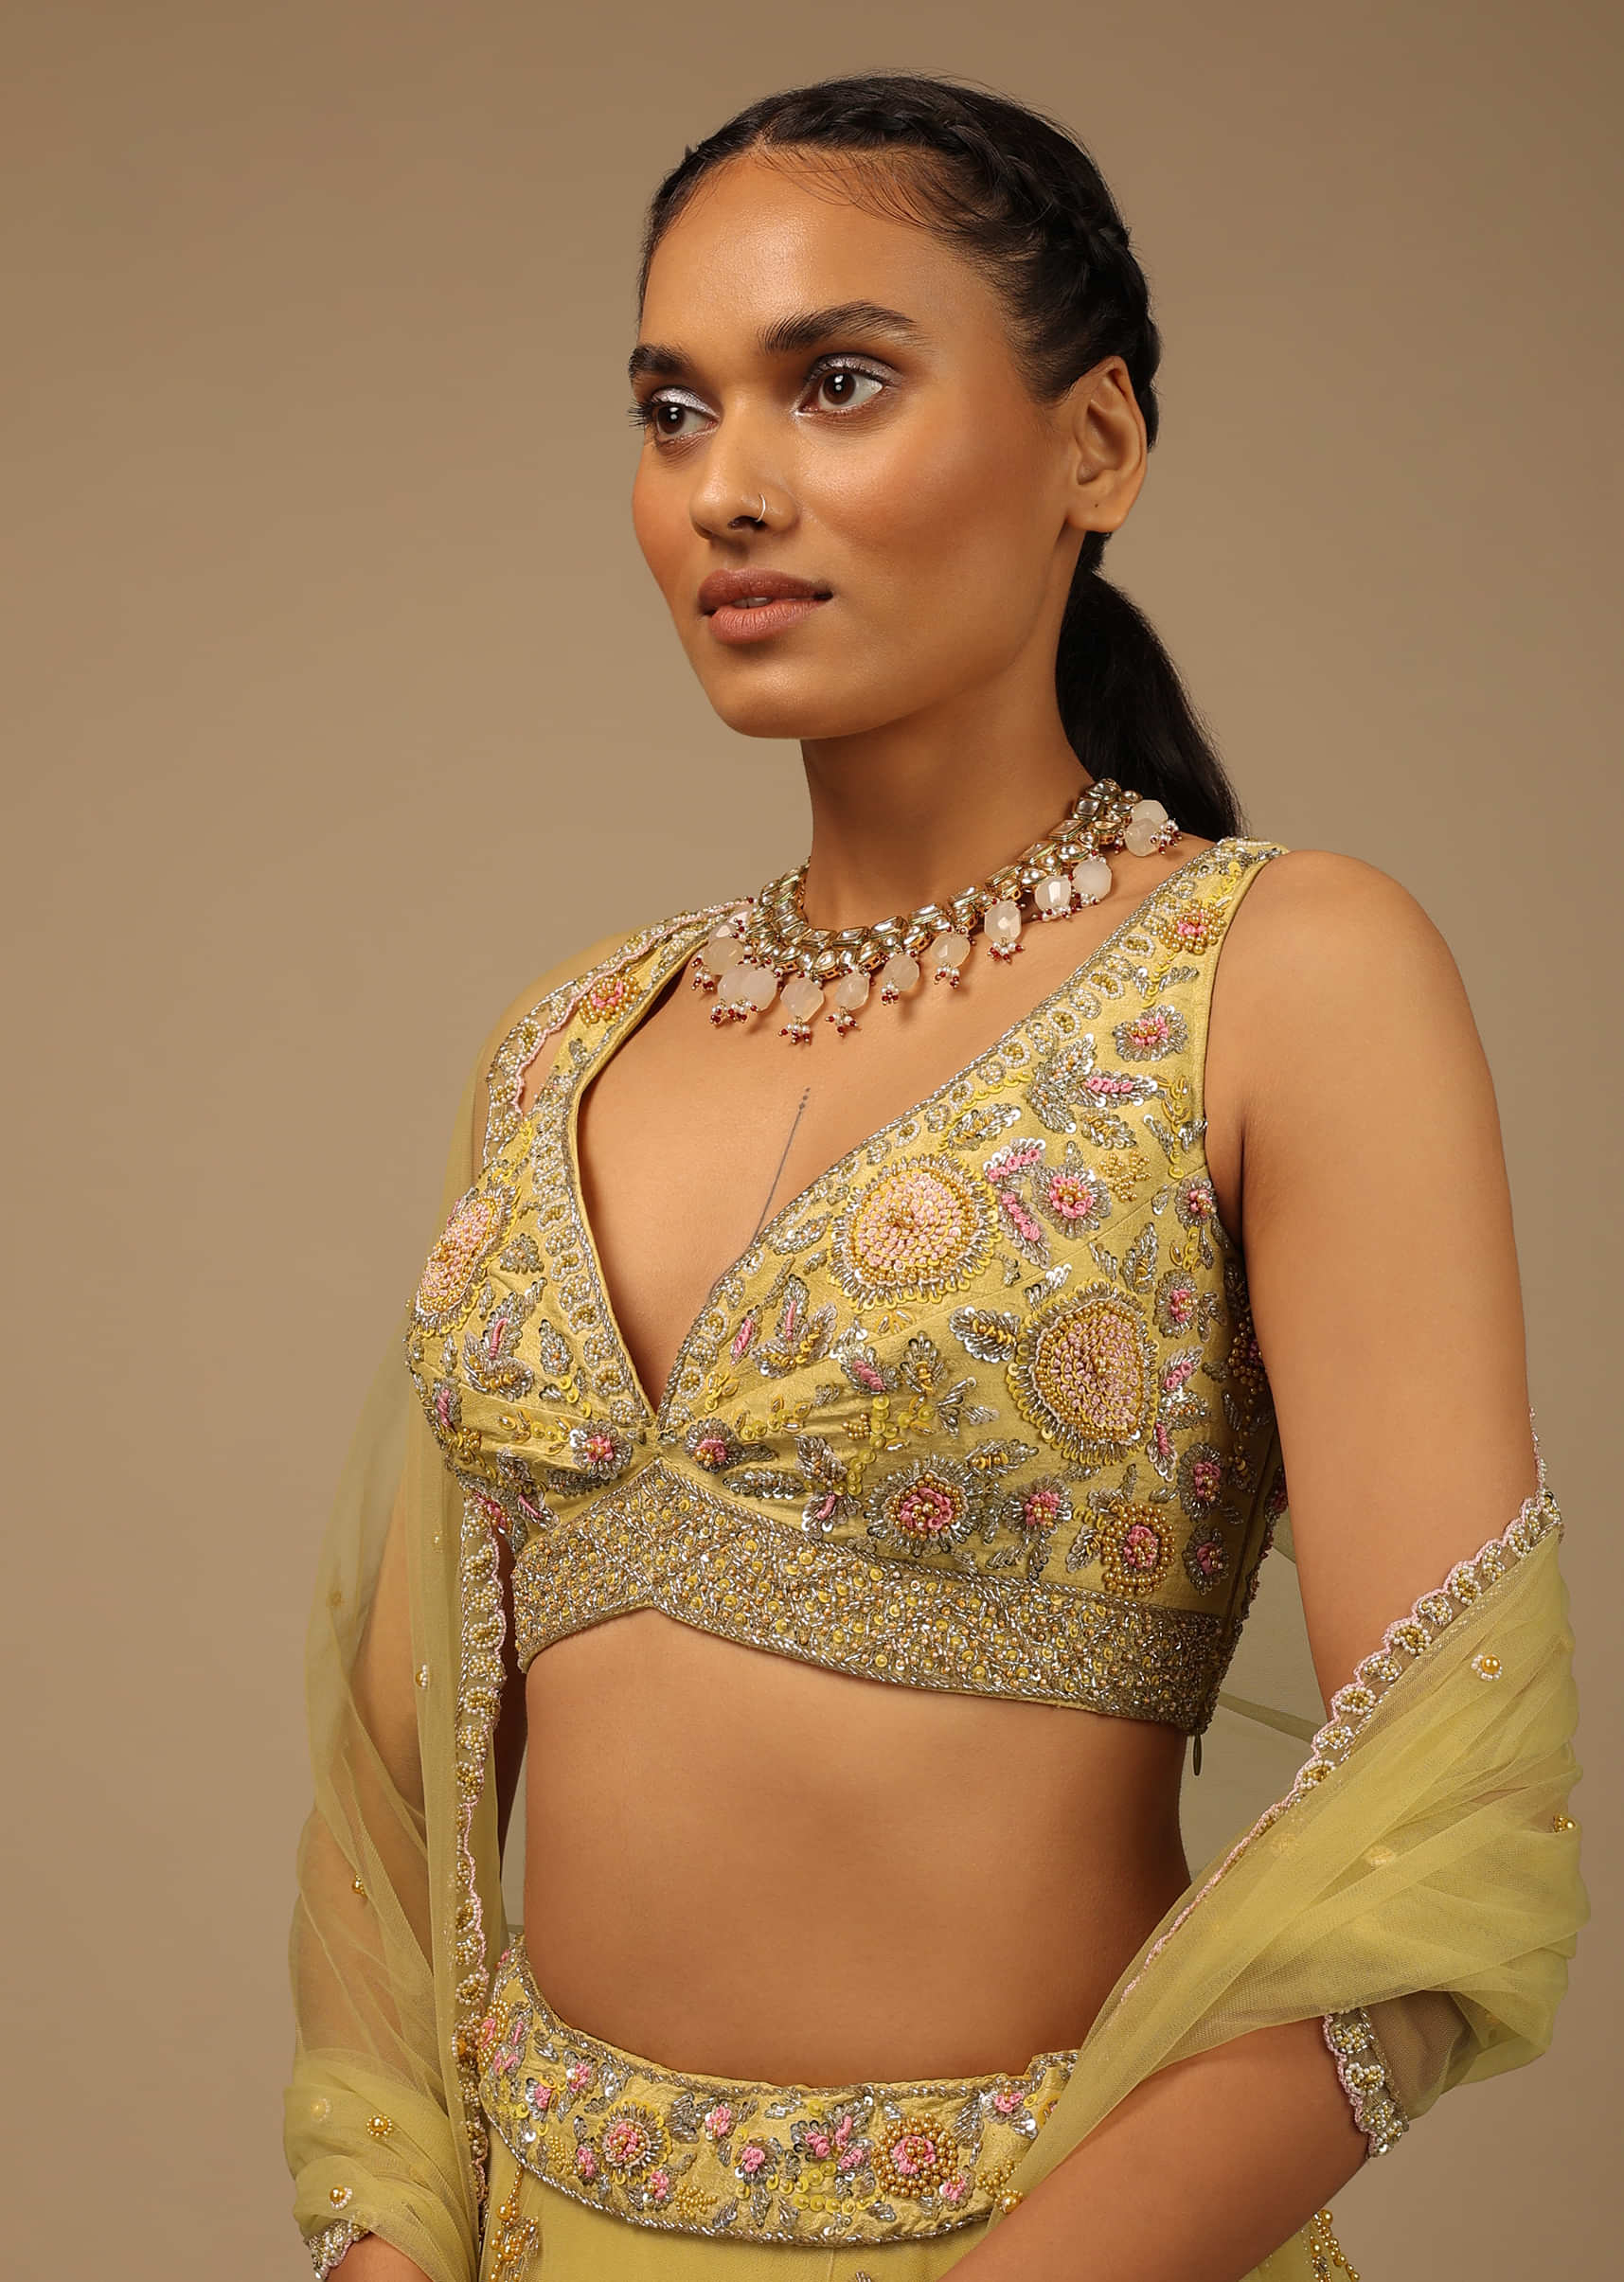 Pastel Yellow Lehenga Choli In Net With Multi Colored Beads And Sequins Embroidered Floral Motifs